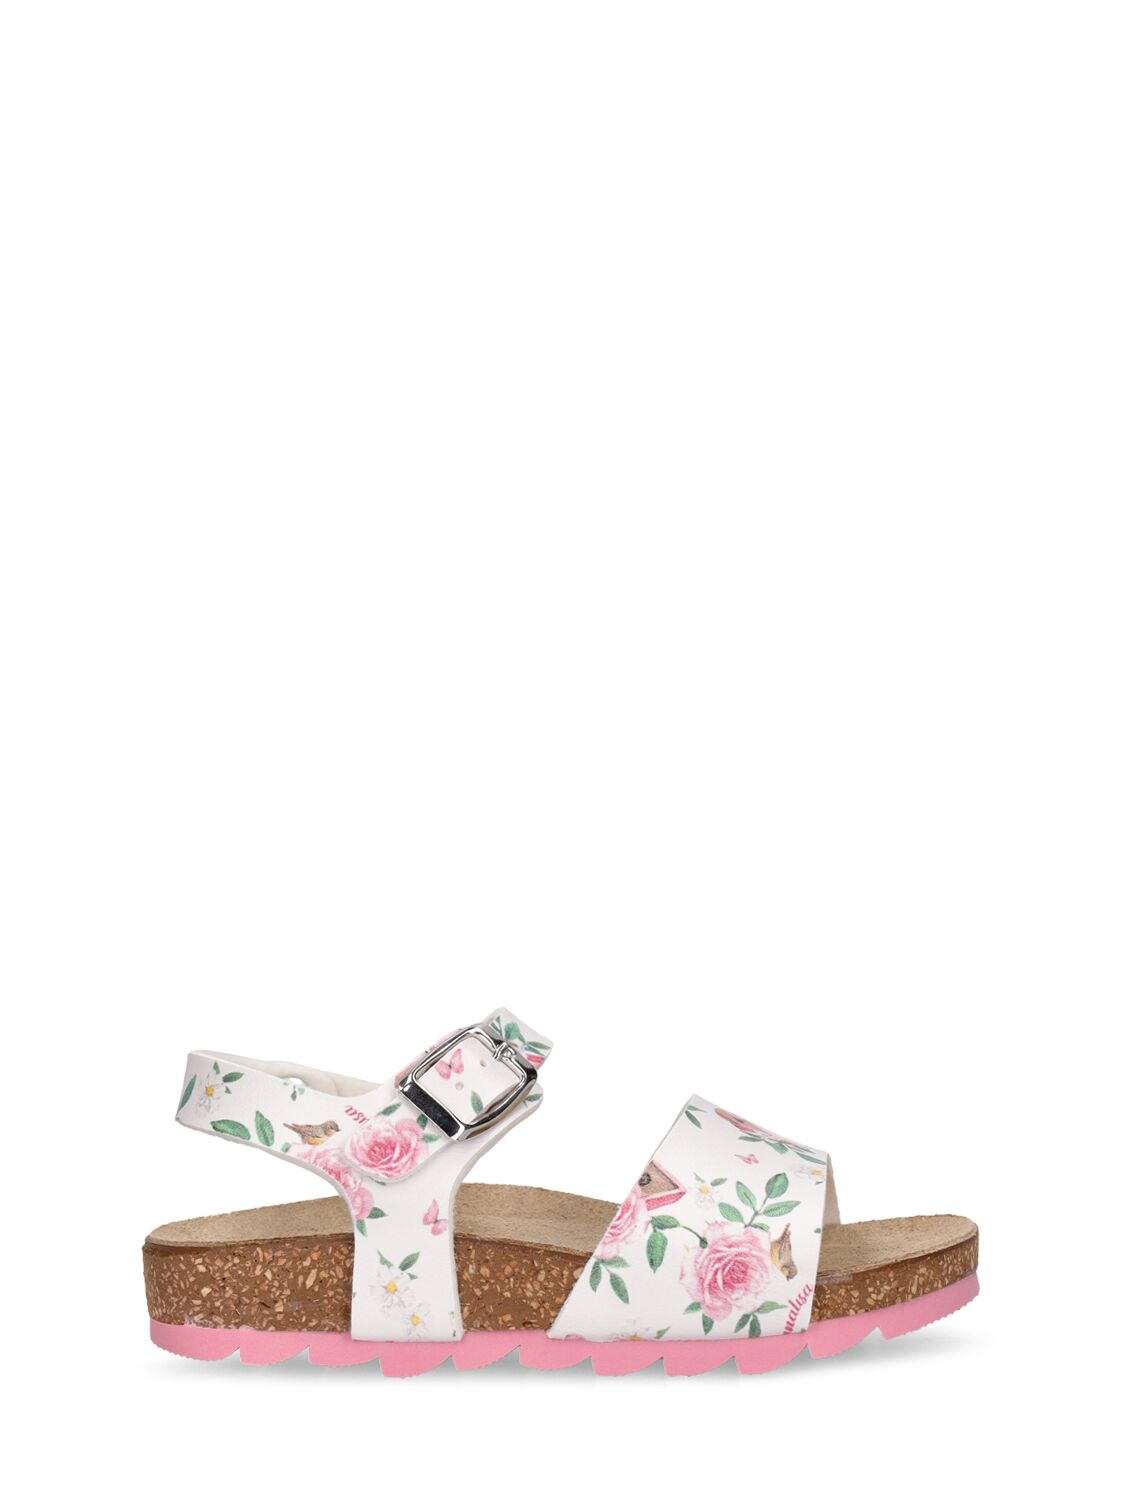 Image of Flower Printed Faux Leather Sandals